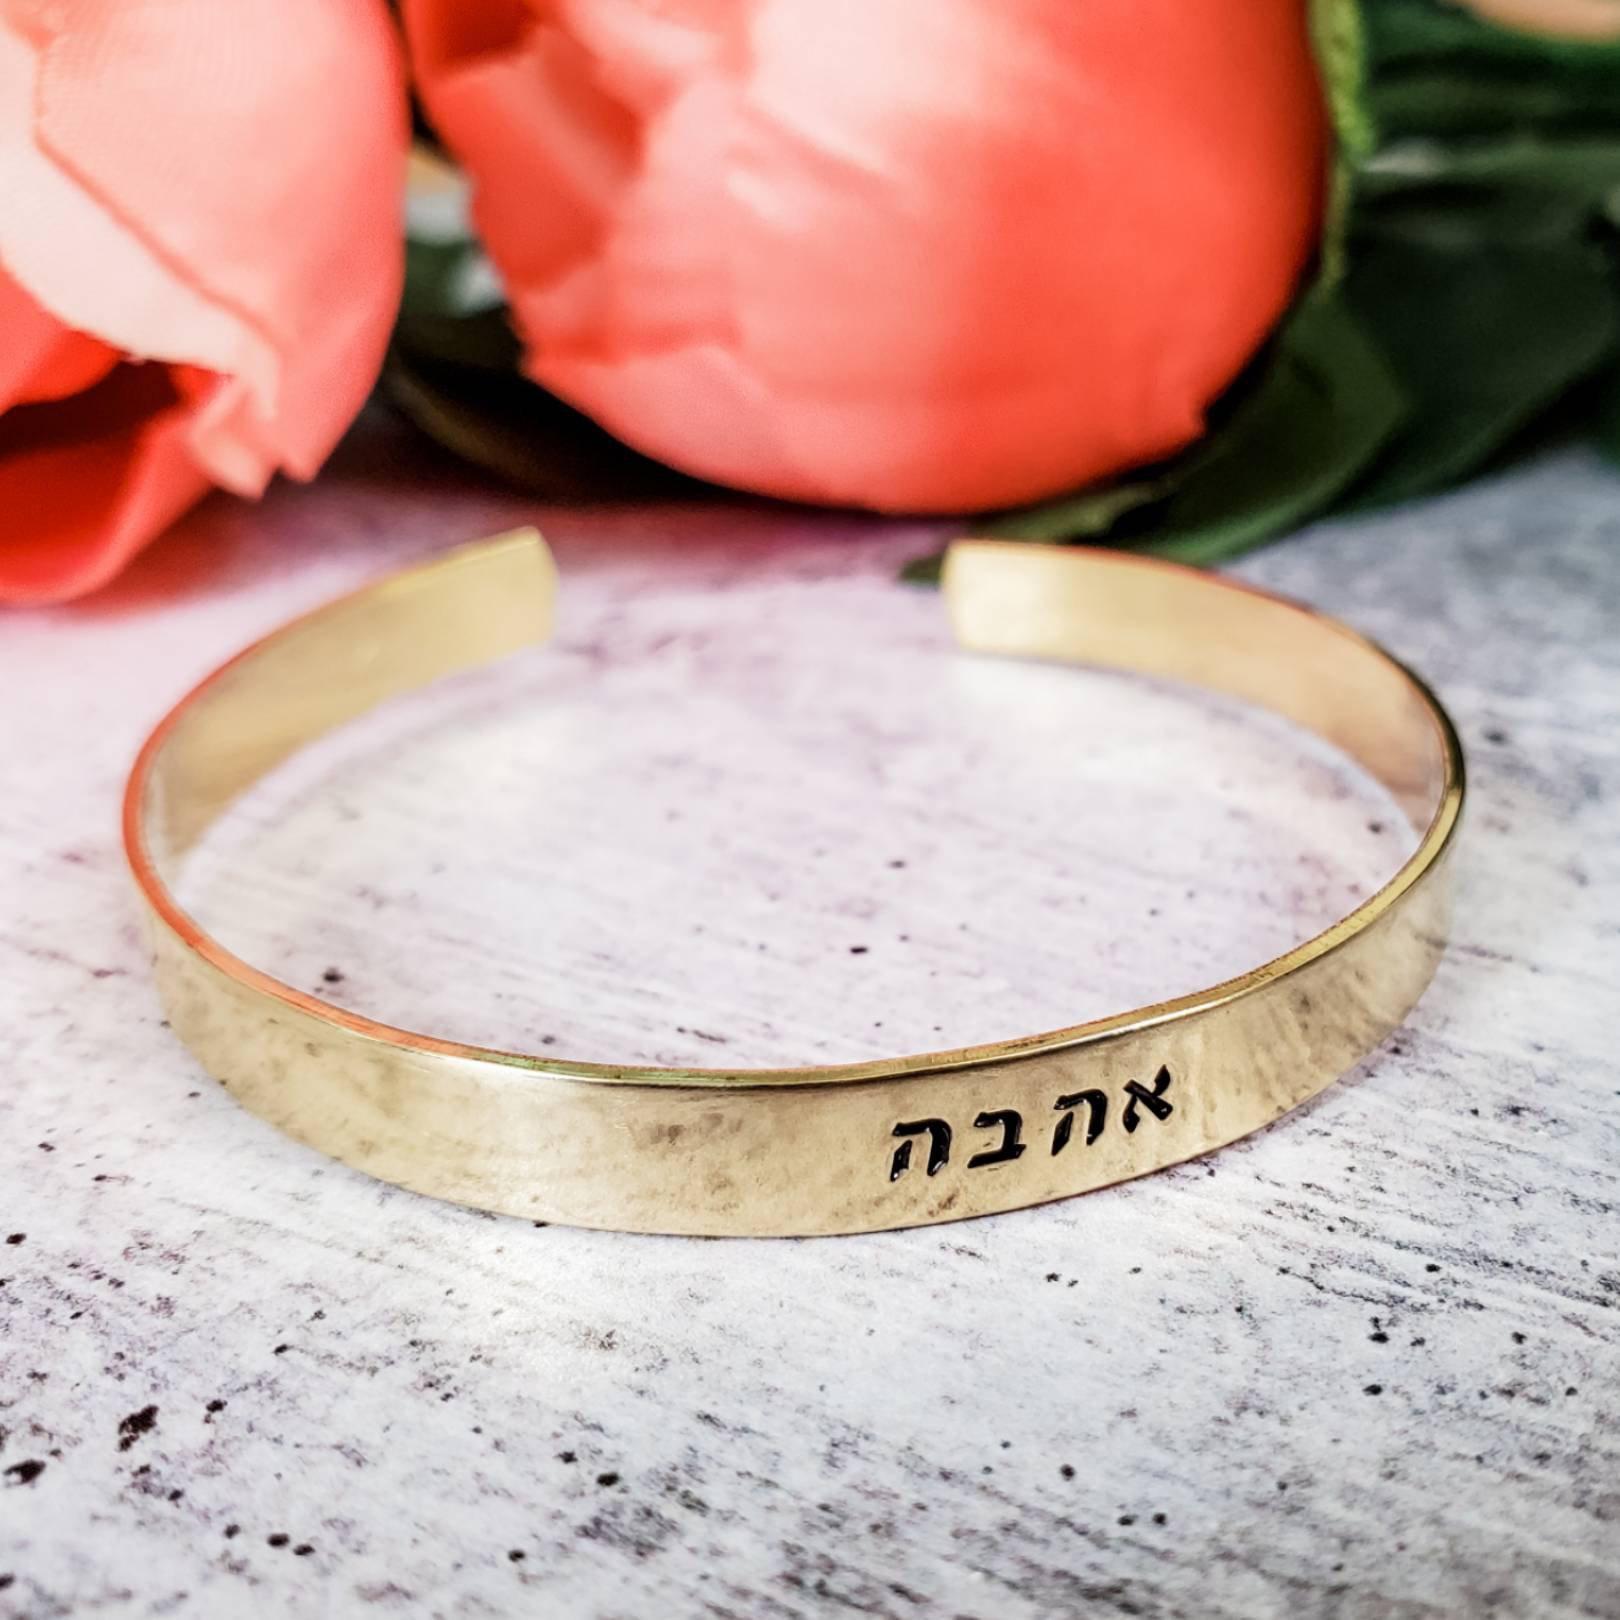 Personalized Hebrew Stacking Cuff Bracelet Salt and Sparkle